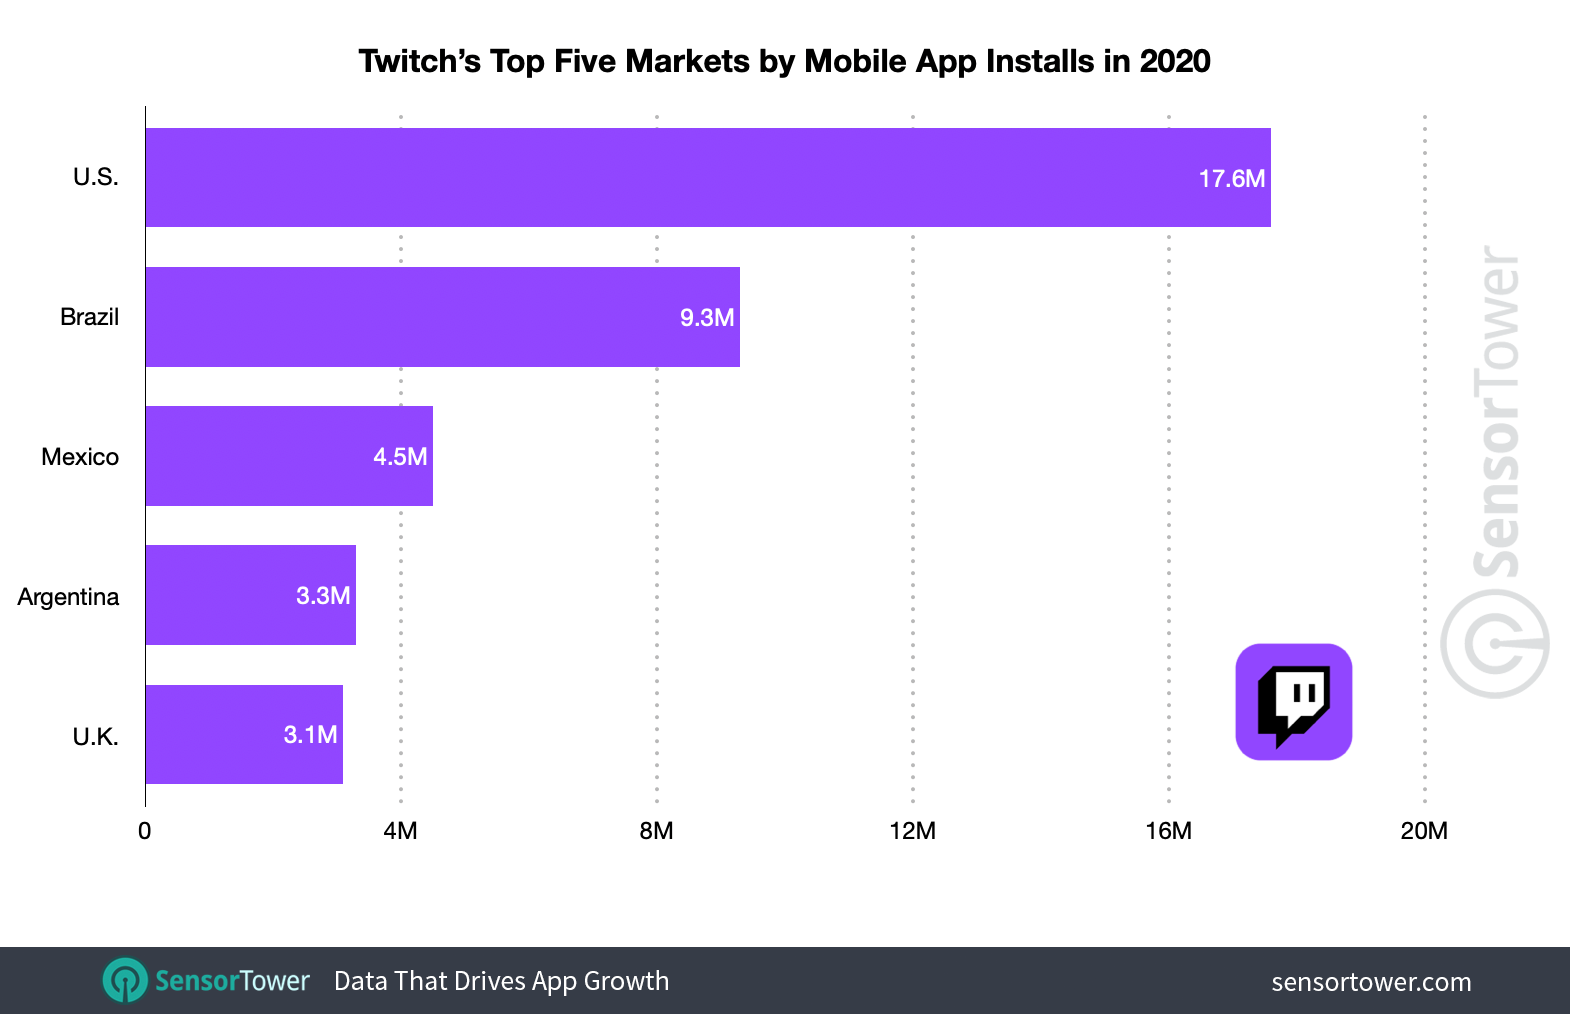 Twitch's five biggest markets in 2020 were the U.S., Brazil, Mexico, Argentina, and United Kingdom.